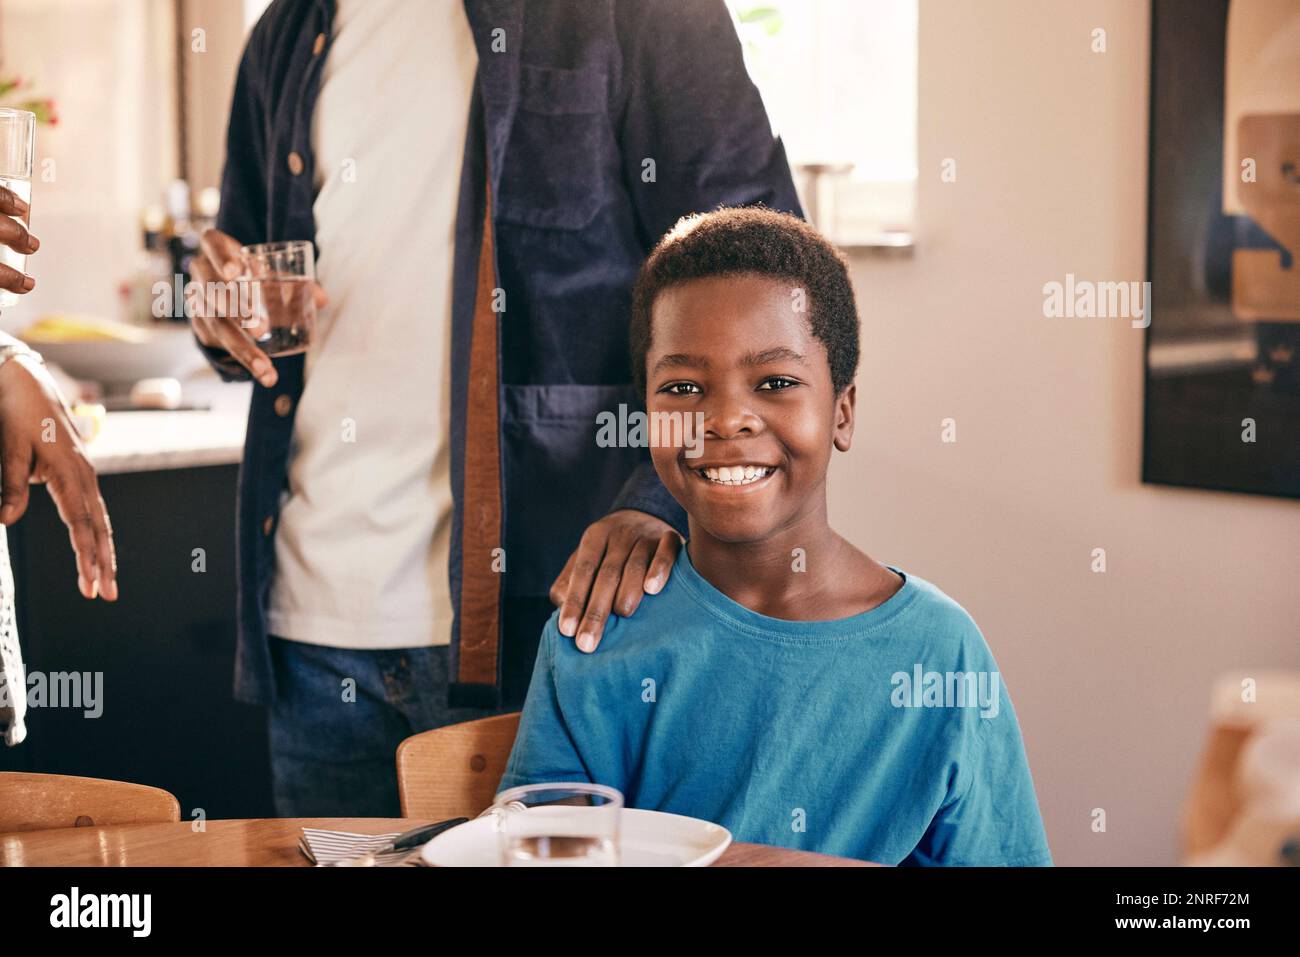 Portrait of happy boy with father keeping hand on shoulder at home Stock Photo